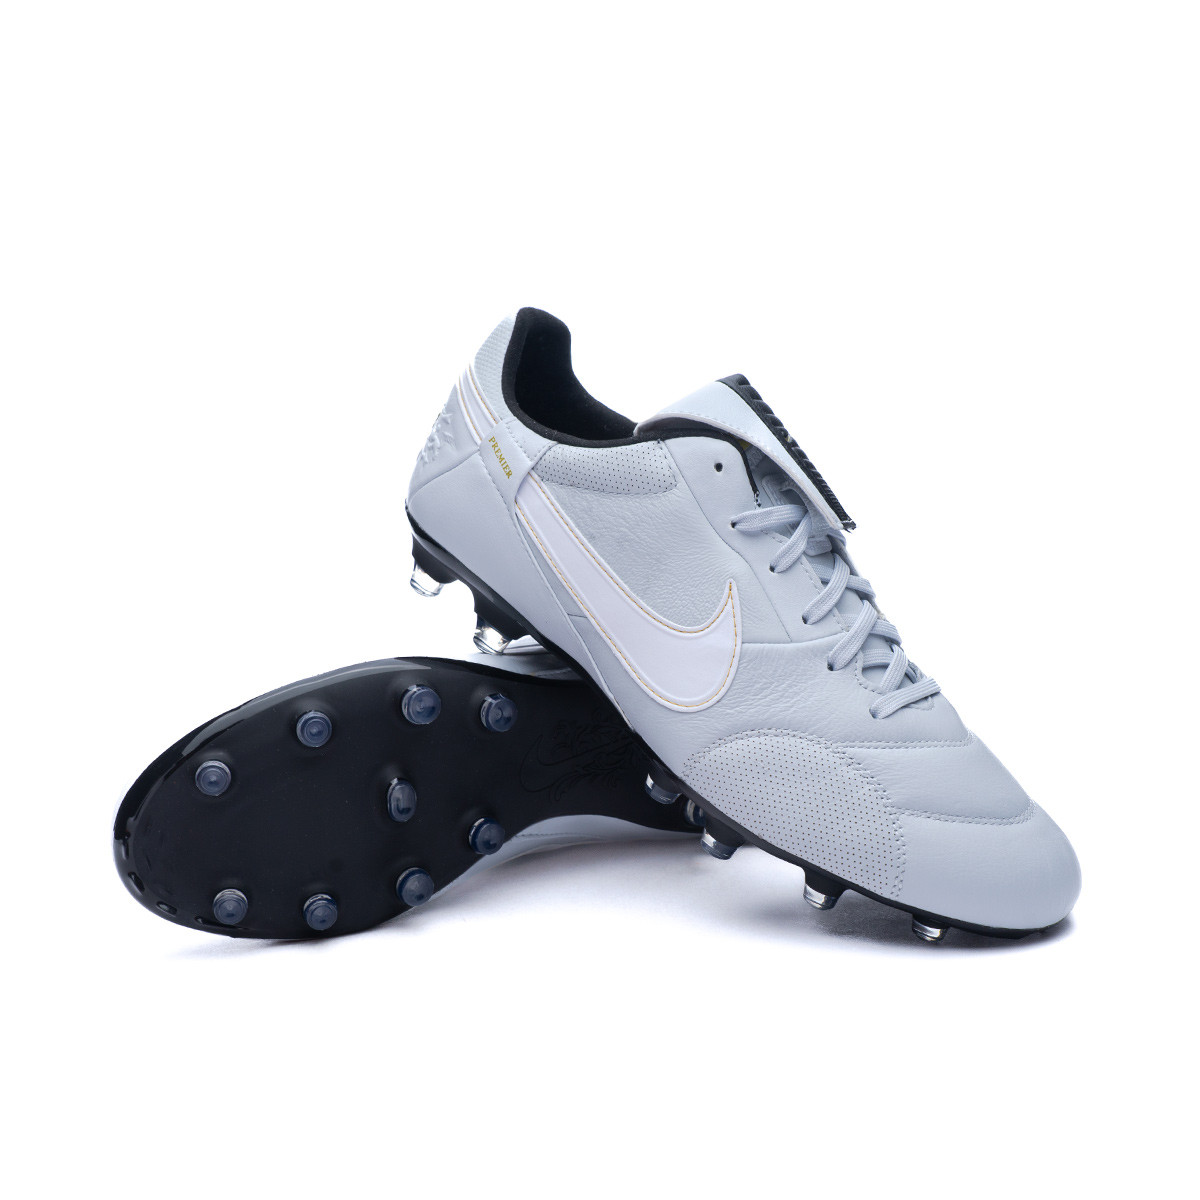 Chaussures de foot homme The Premier 3 FG Nike · Nike · Sports